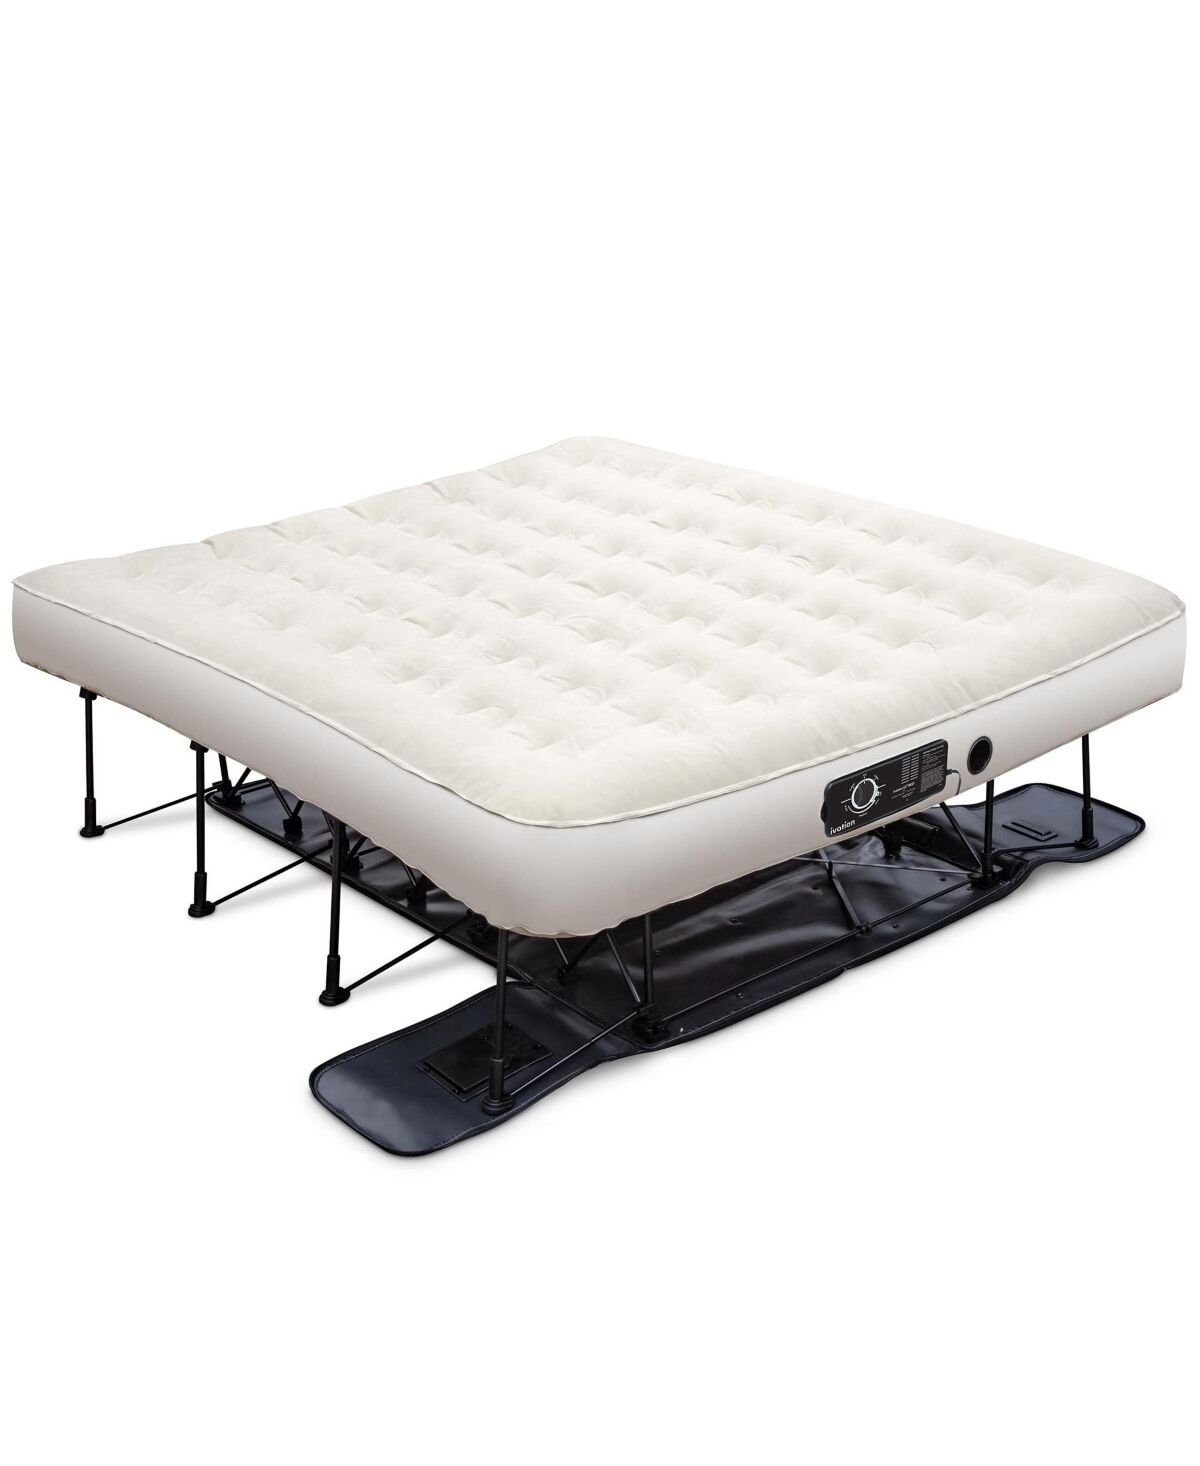 Ivation Ez-Bed, King Size Portable Air Mattress with Built In Pump - White